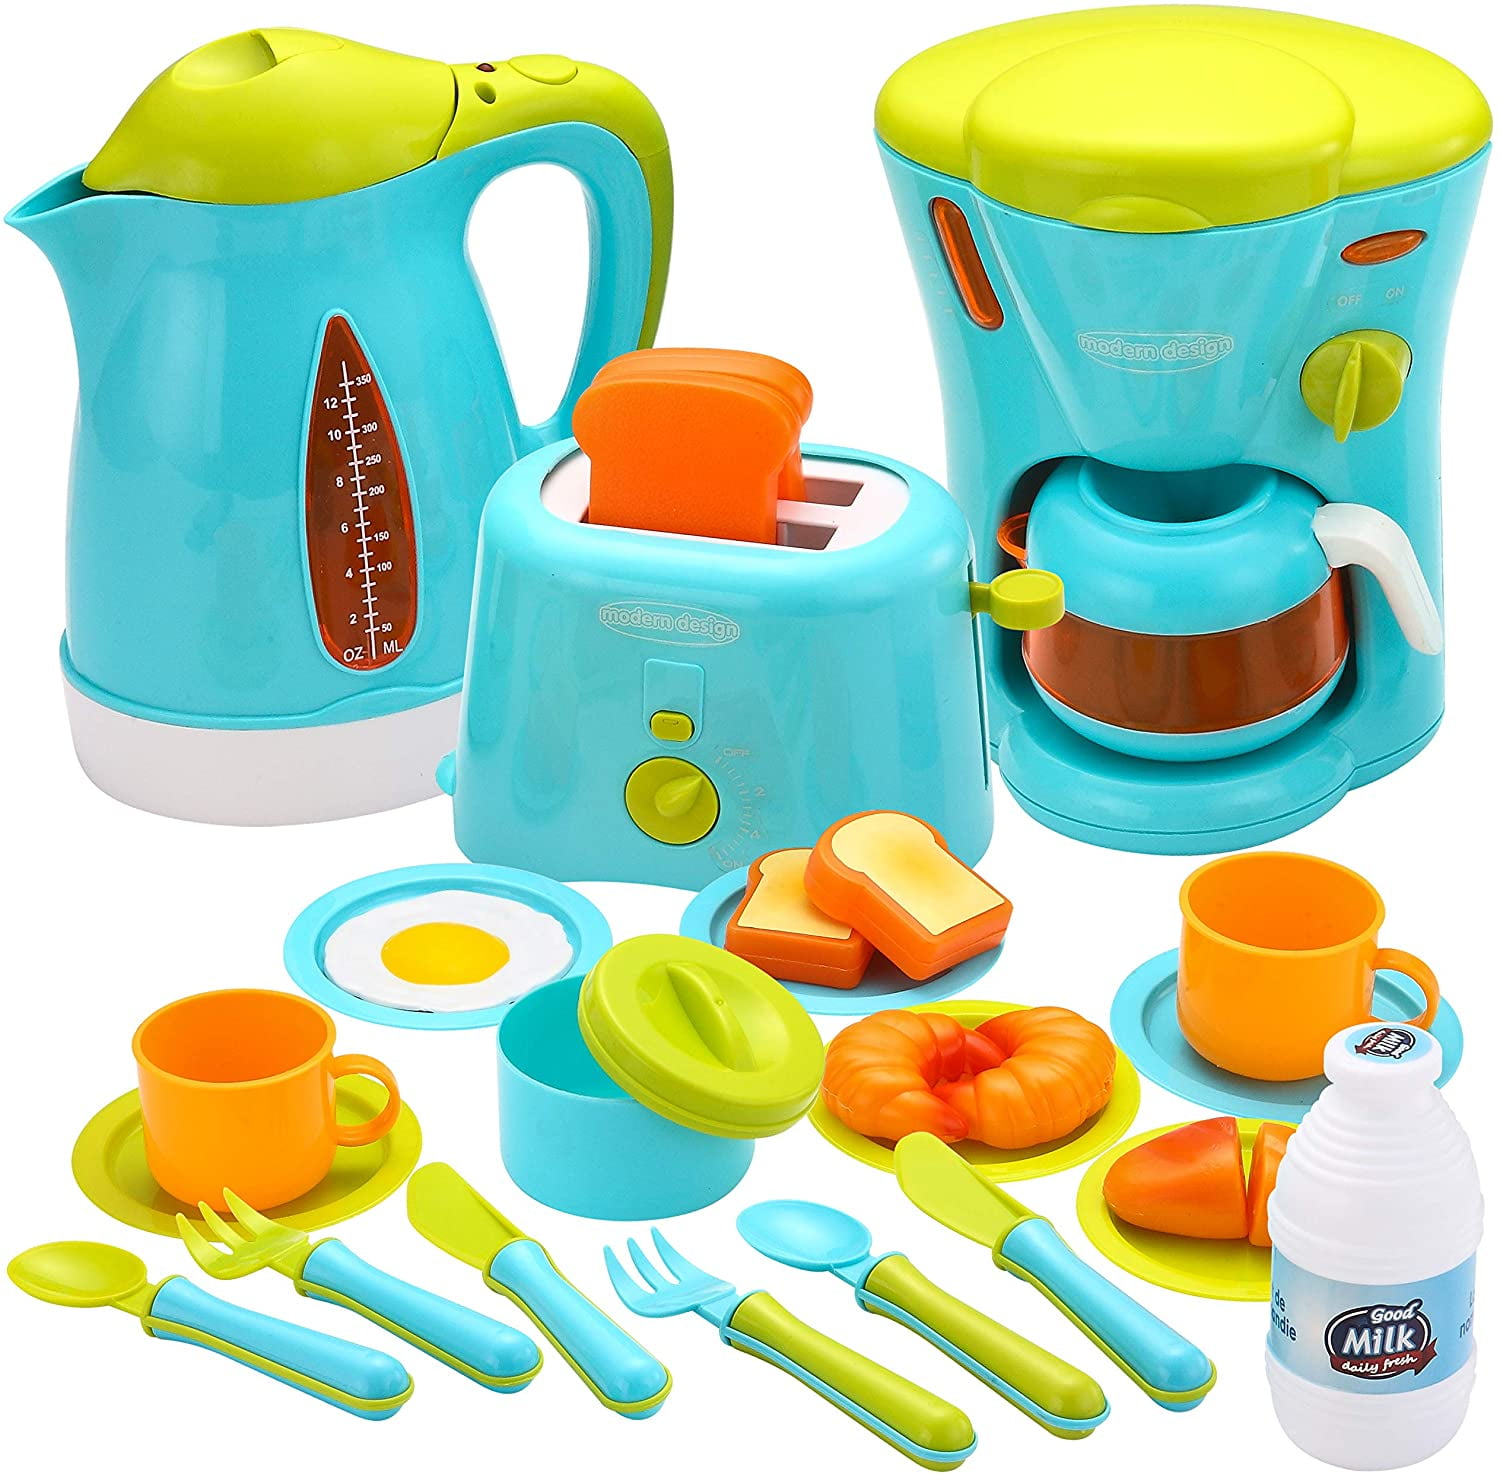 SumToy Kids Kitchen Pretend Play Toys with Coffee Maker Machine, Kettle, Toaster, Utensils and